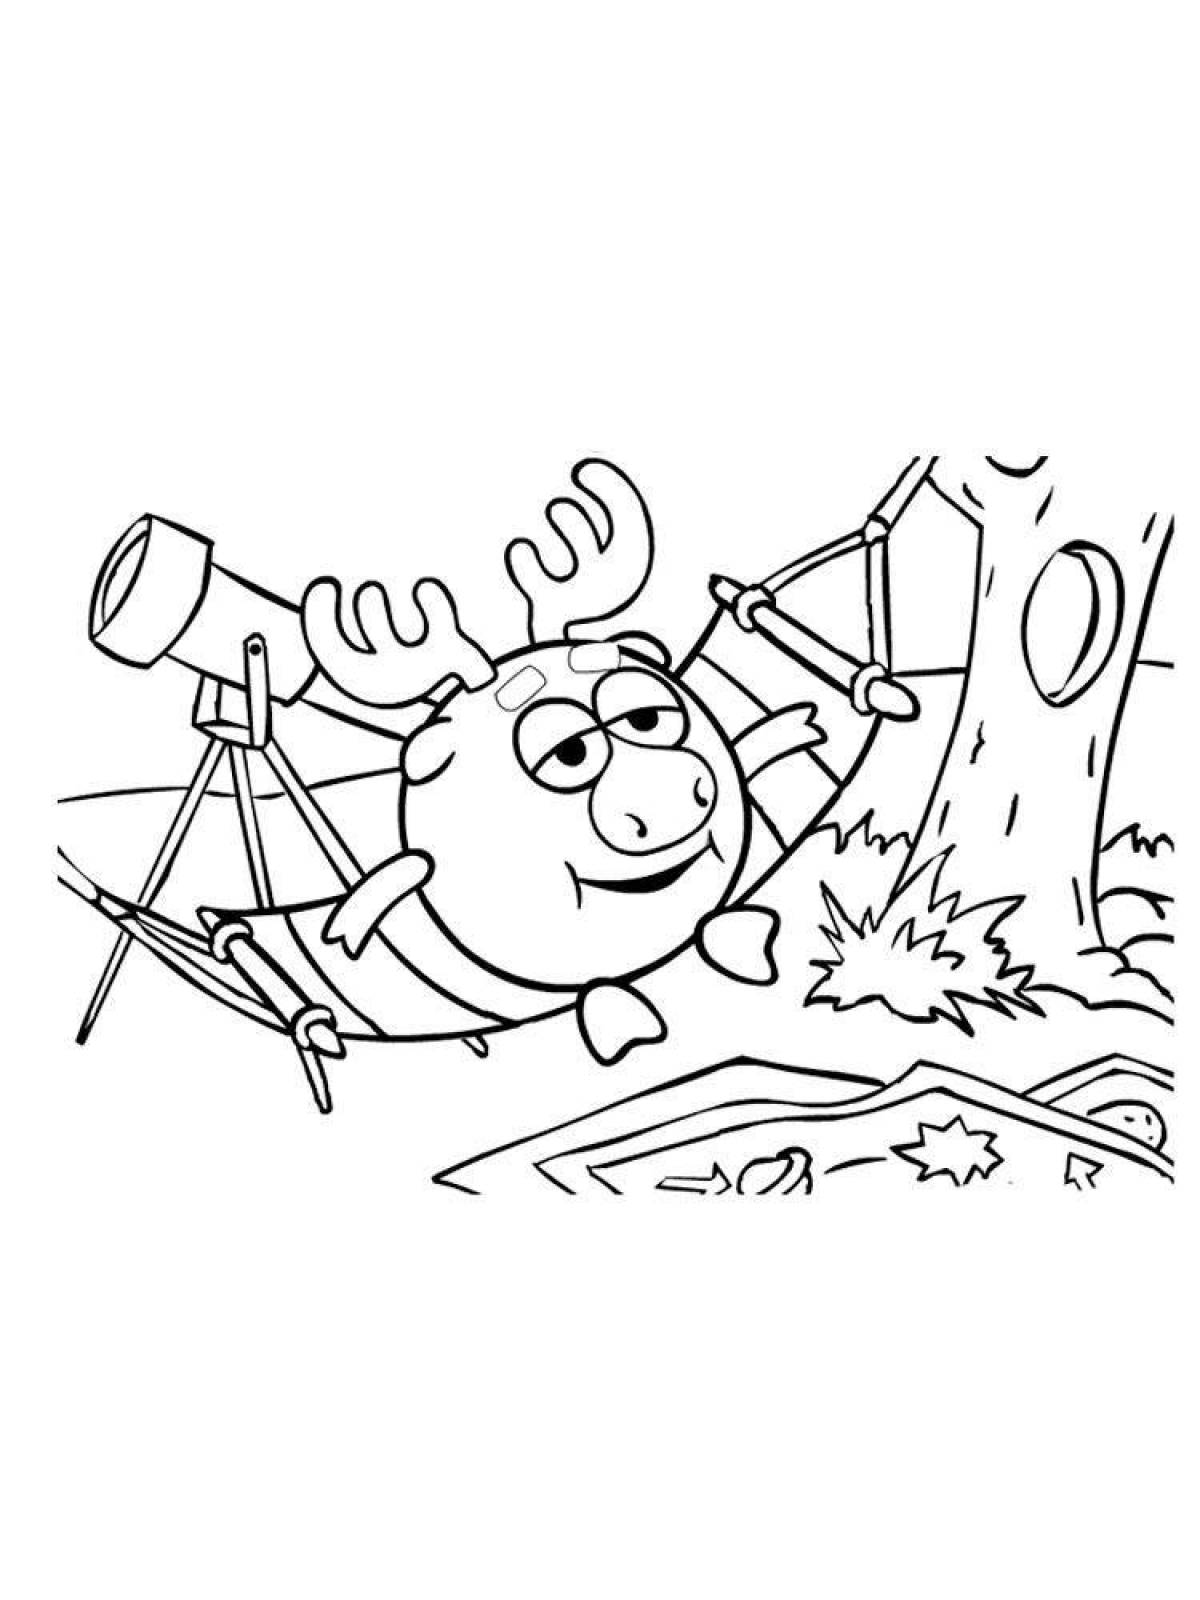 Exalted elk coloring page